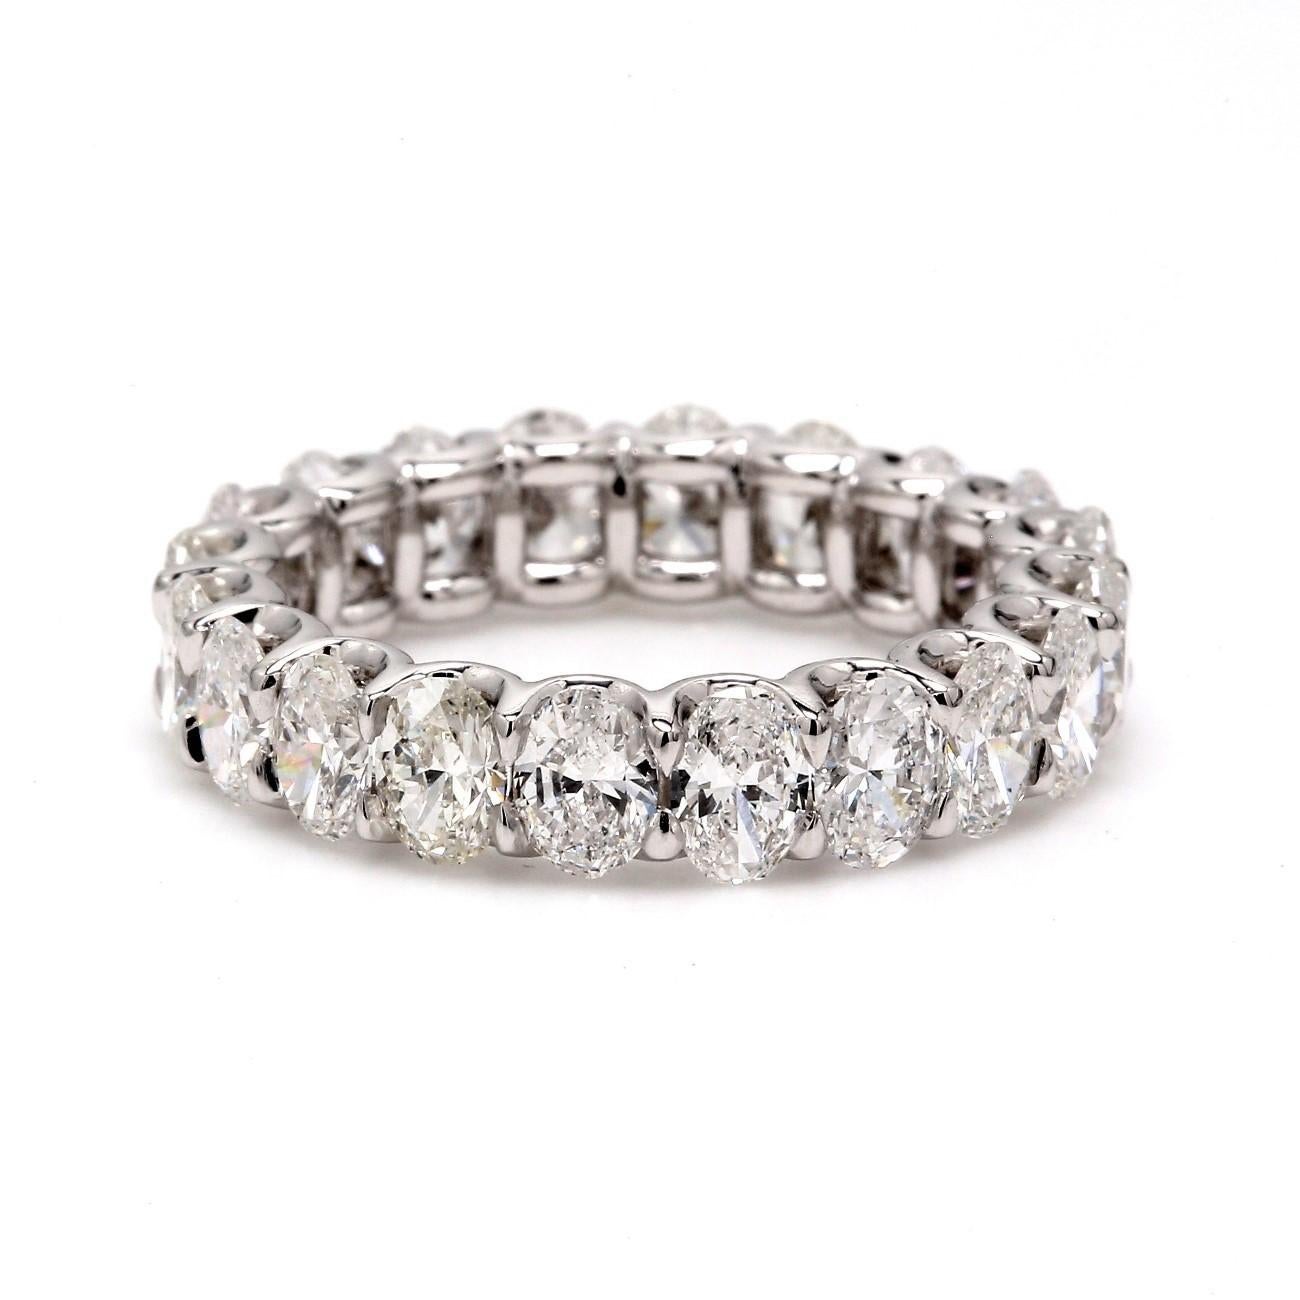 Women's Eternity Band in Platinum with Oval Cut Diamonds. D3.93ct.t.w. For Sale